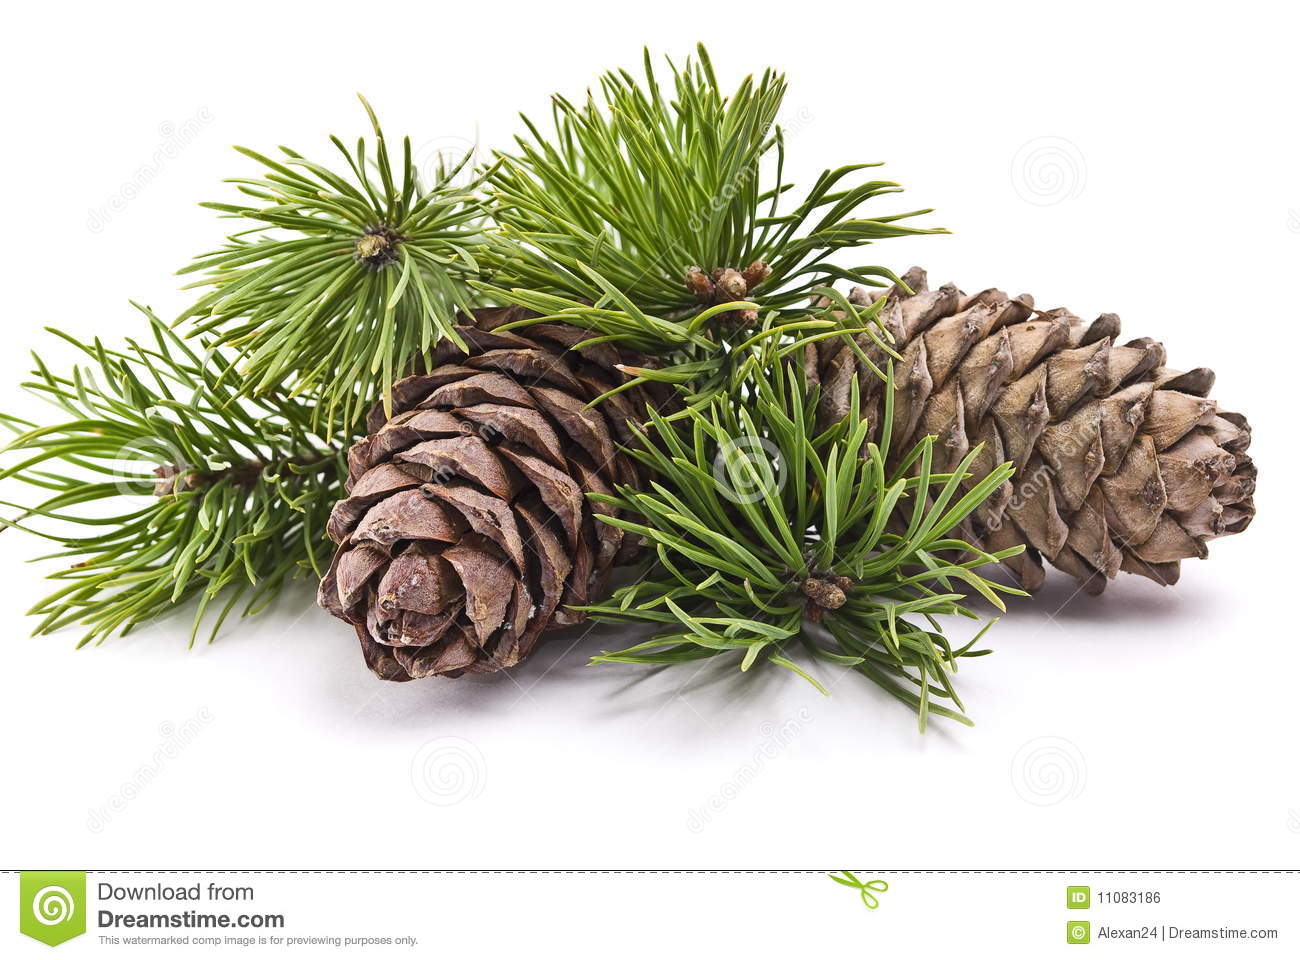 Siberian Pine Cone With Branch Royalty Free Stock Image   Image